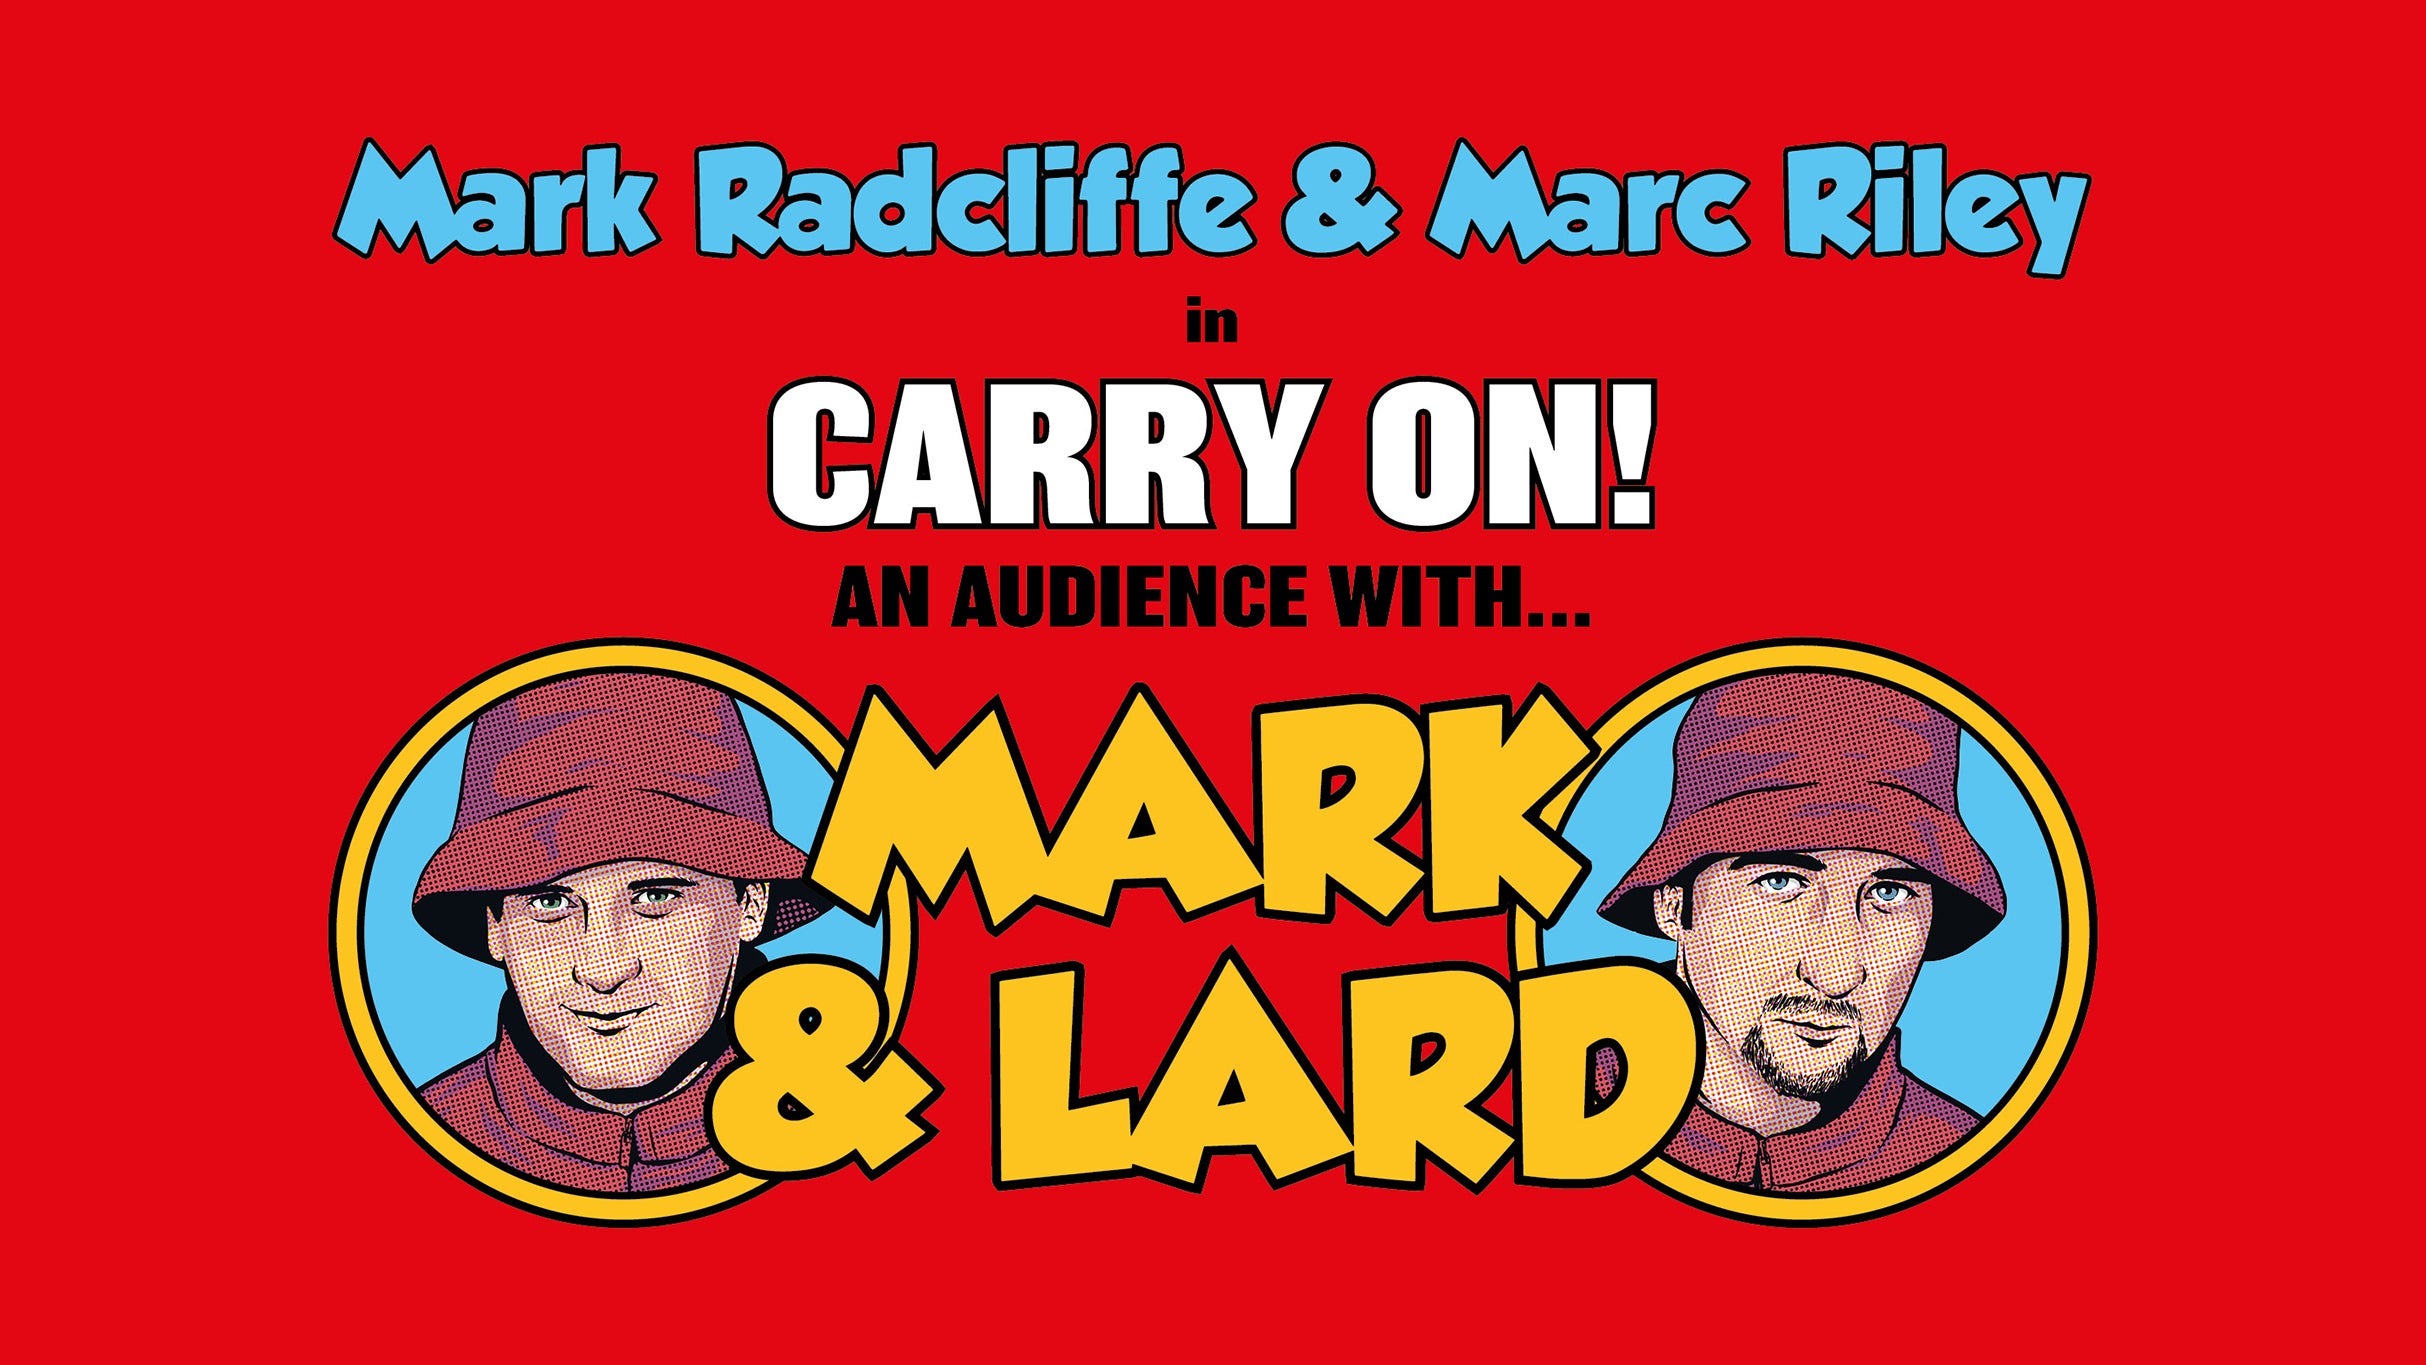 An Audience with Mark and Lard pre-sale password